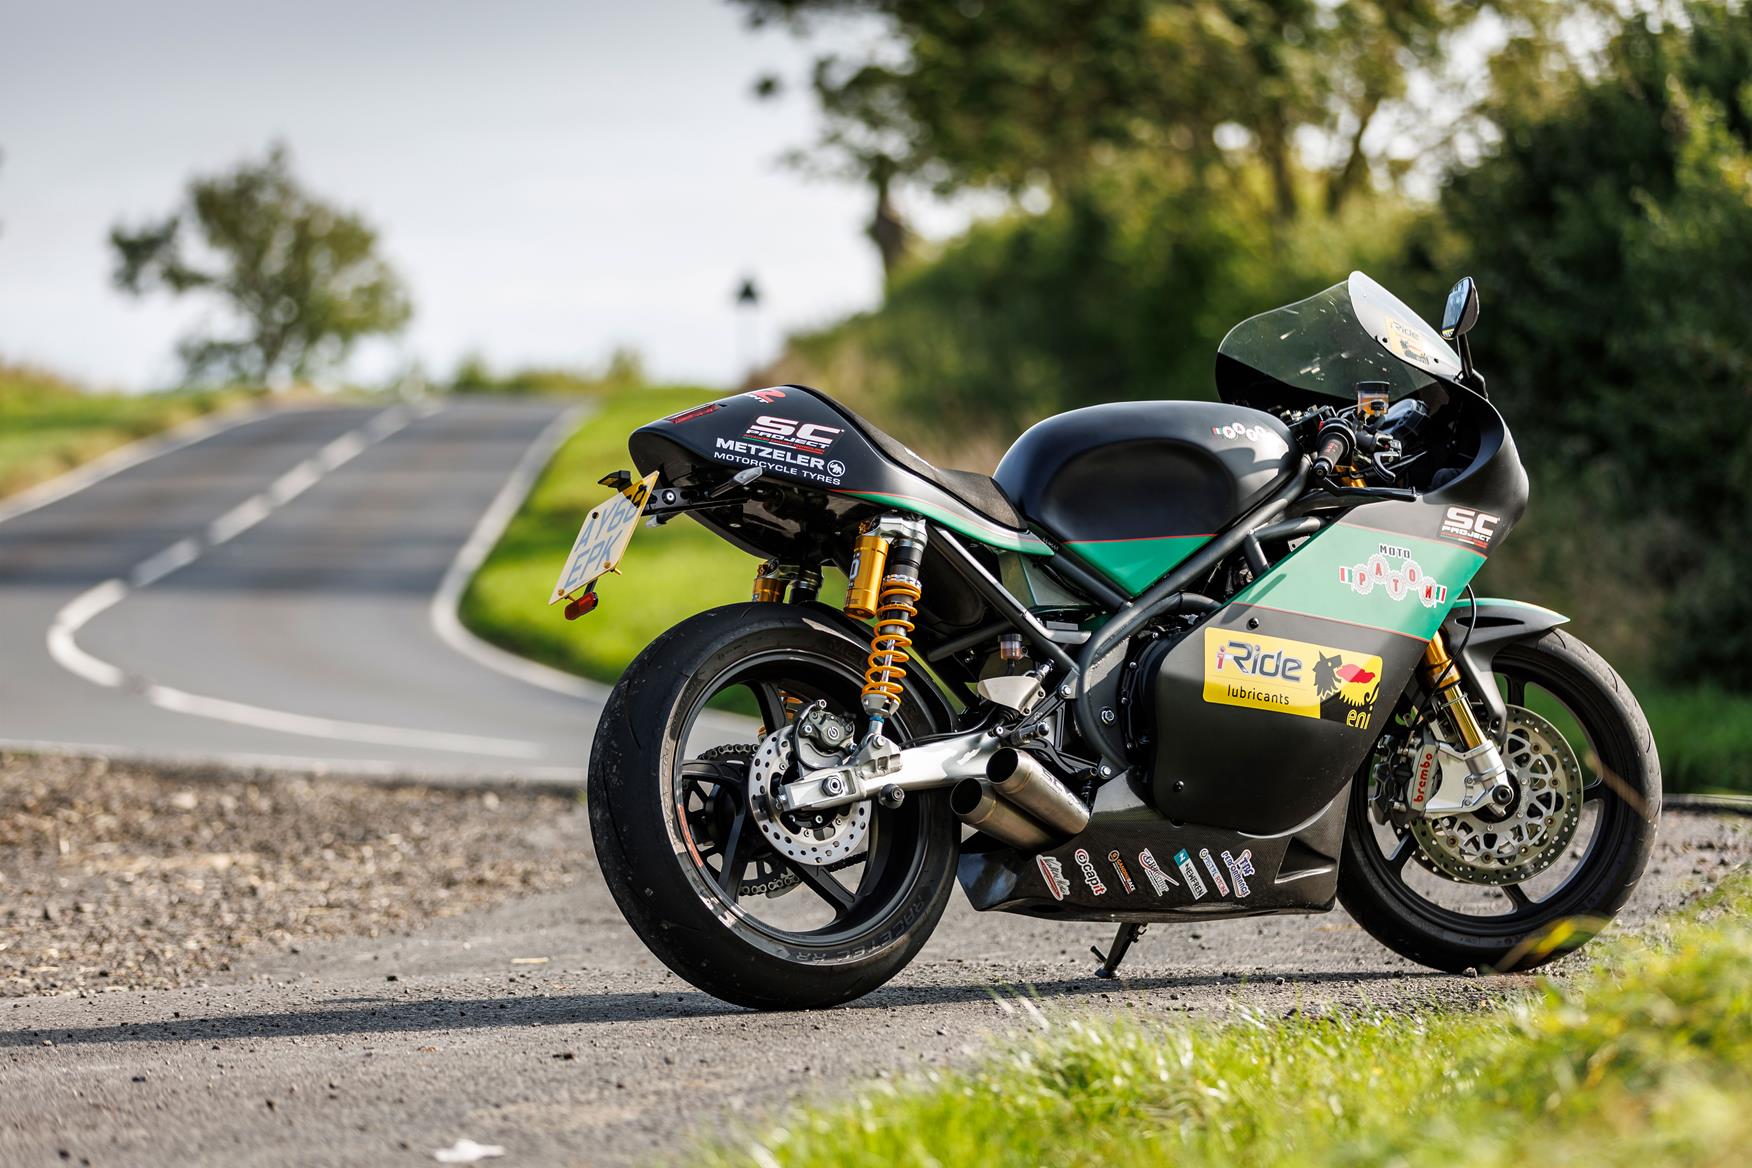 Paton S1-R Lightweight 60th Anniversary Limited Edition (2018 - on